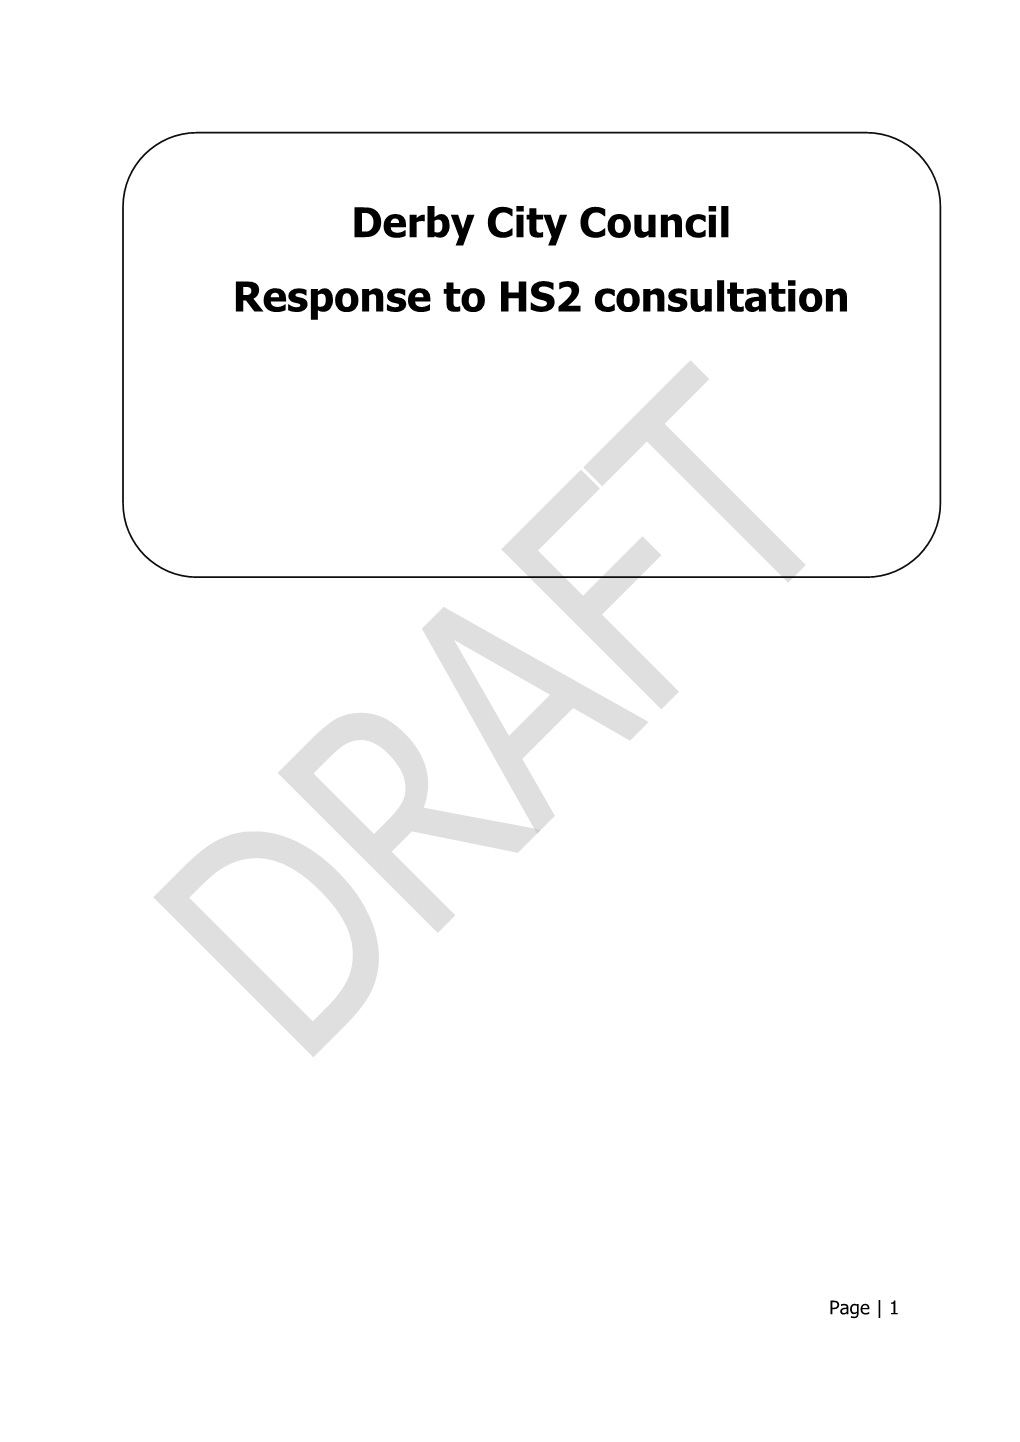 Derby City Council Response to HS2 Consultation